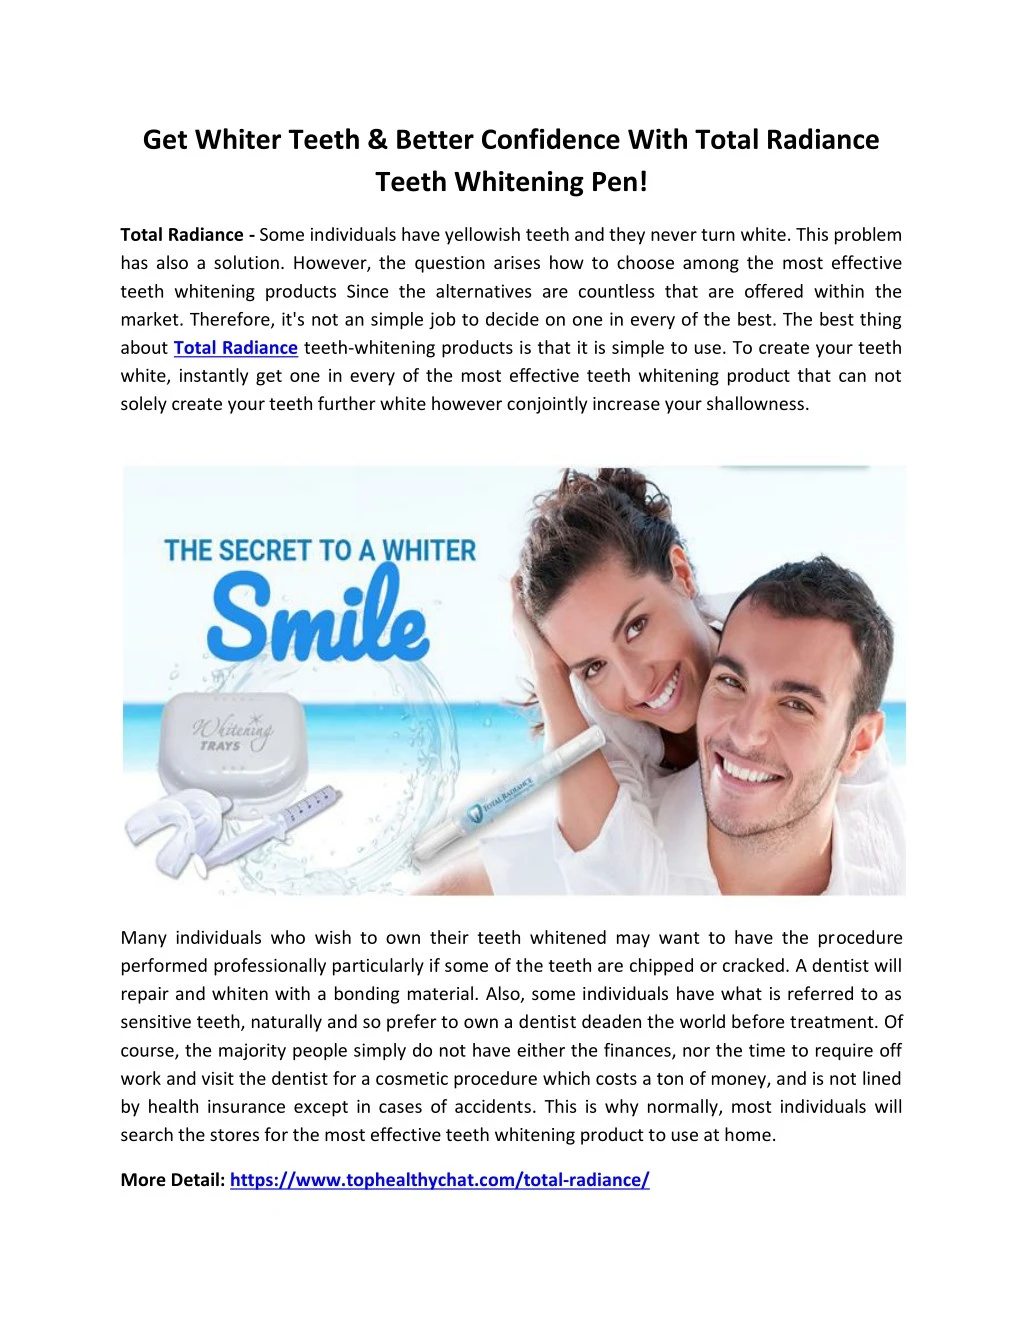 get whiter teeth better confidence with total